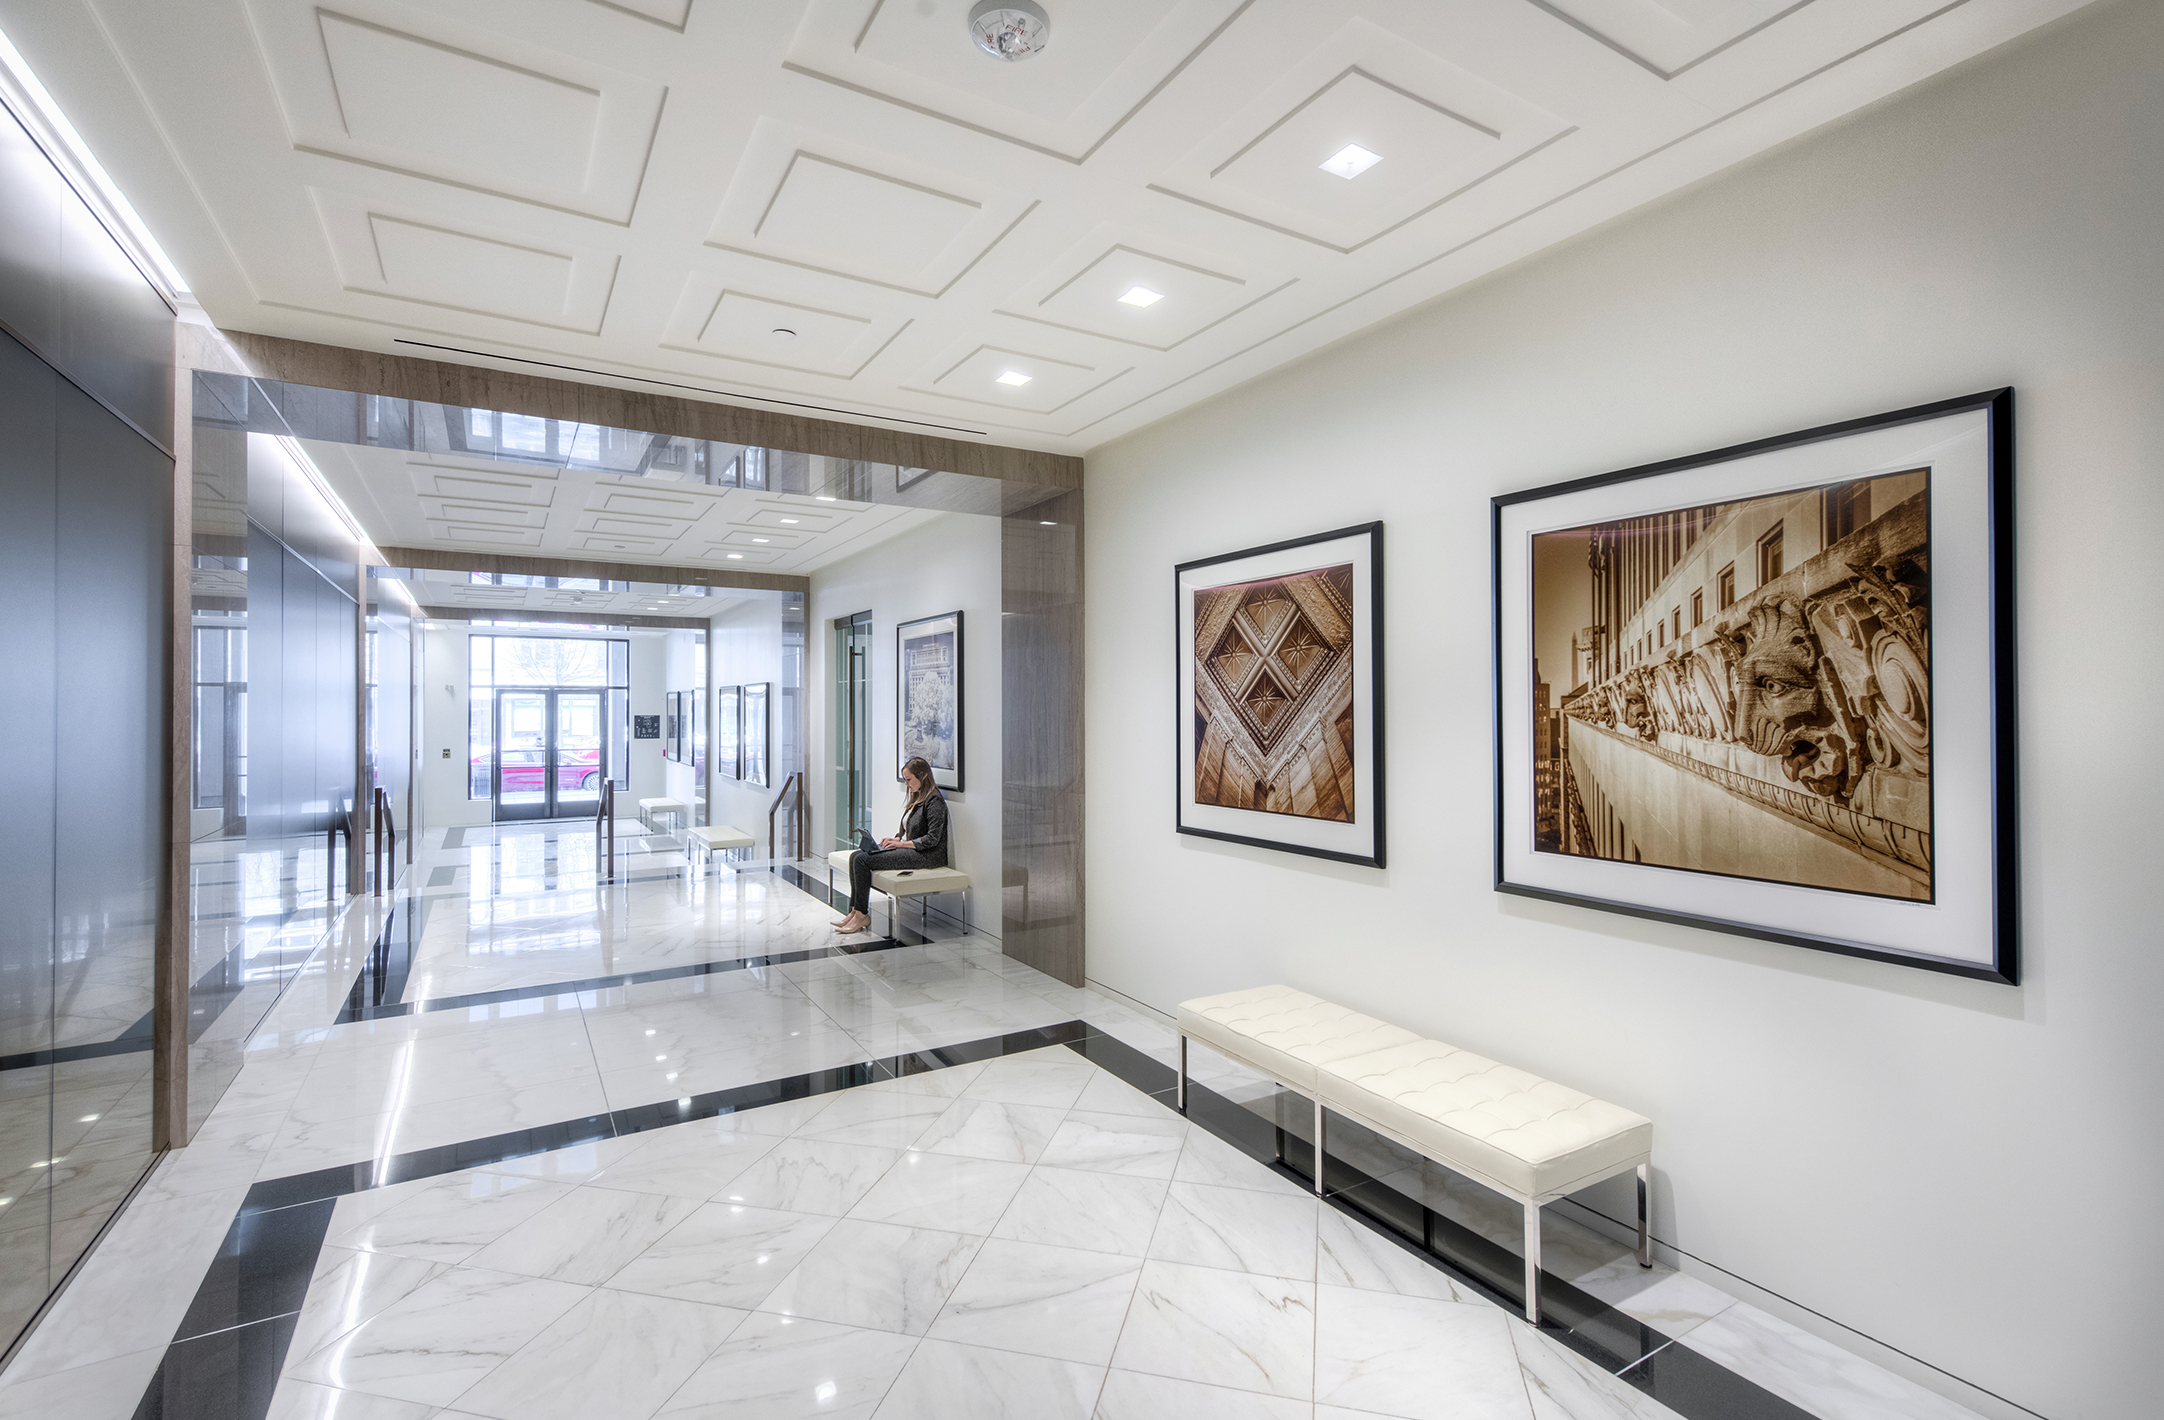 Image of K Street entrance to the 1500 K Street luxury office building, including artwork and gym access.